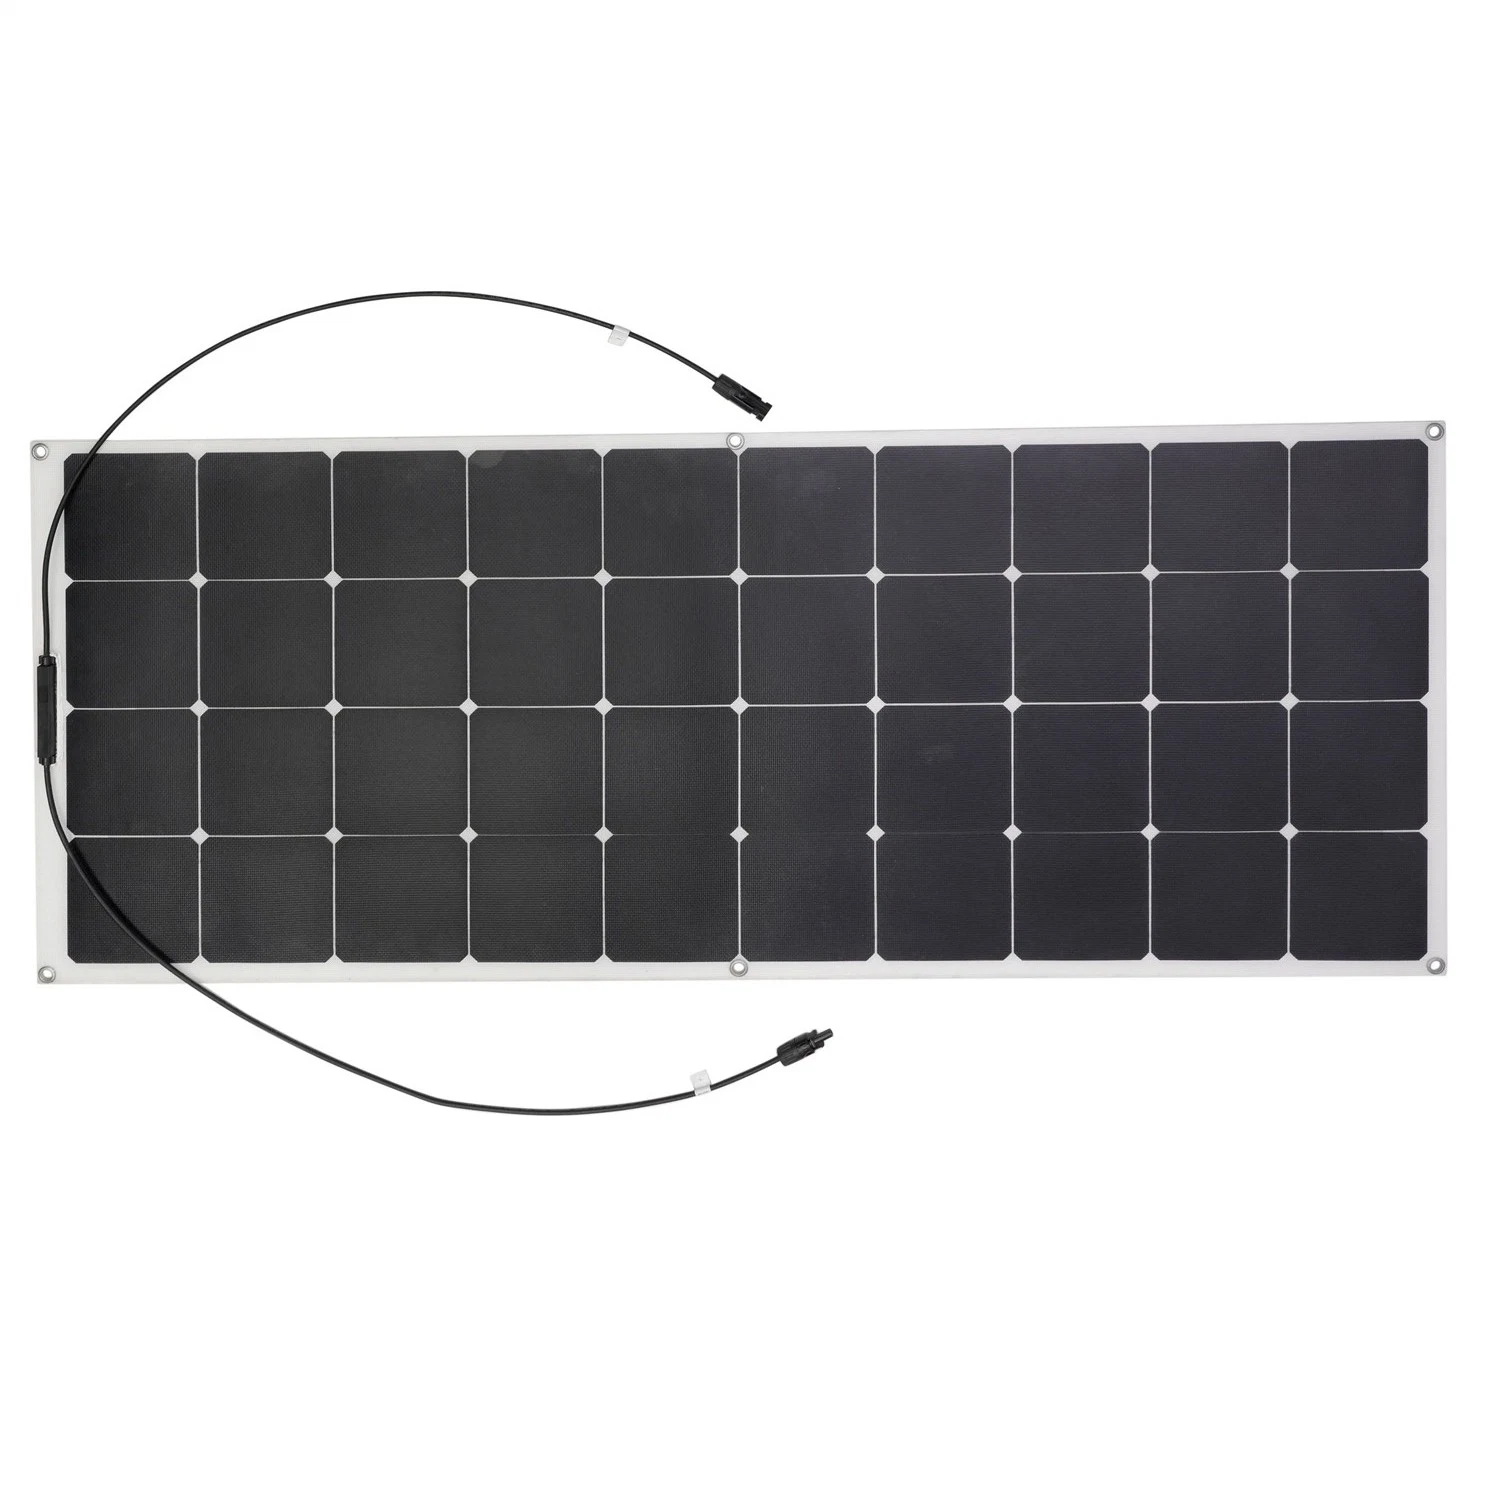 Sturdy & Durable Bending Flexible Solar PV Panel Module Charger Support Series and Parallel Connection to Charge 12V/24V/48V Batteries for off-Grid Systems